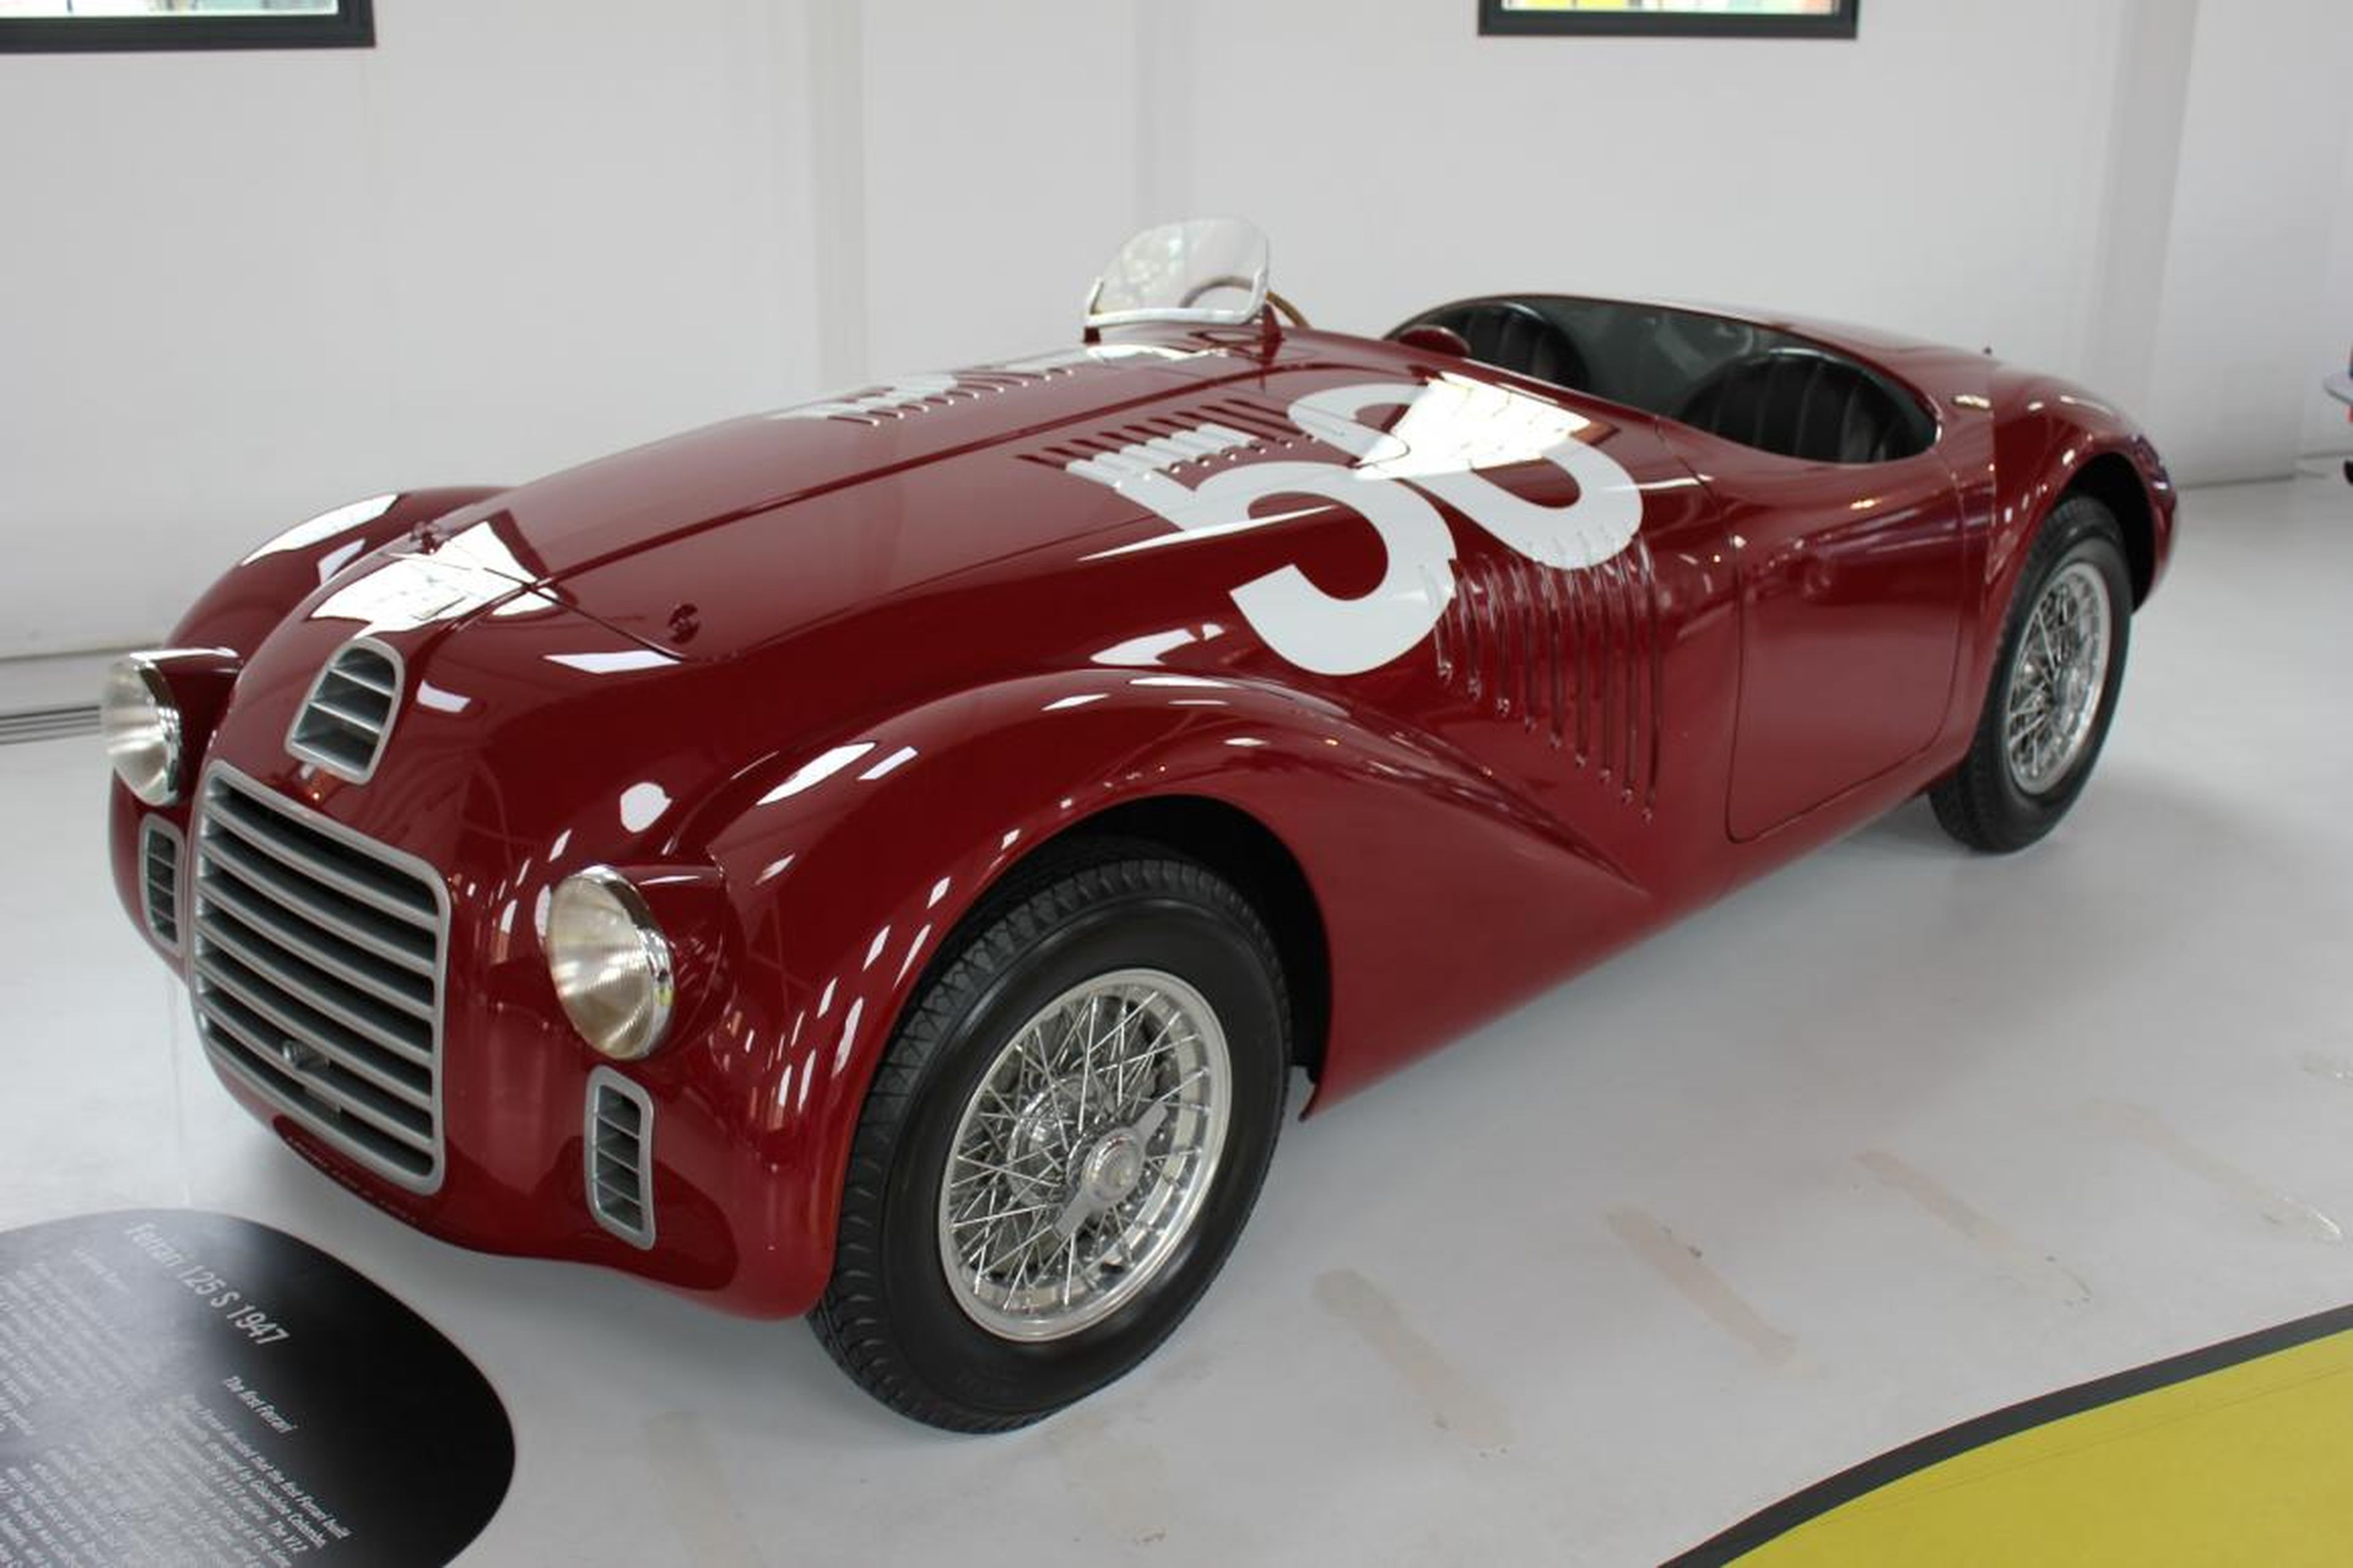 In 1947, Ferrari launched the 125. And since the noncompete agreement with Alfa had lapsed, this was the first car to carry the Ferrari name.